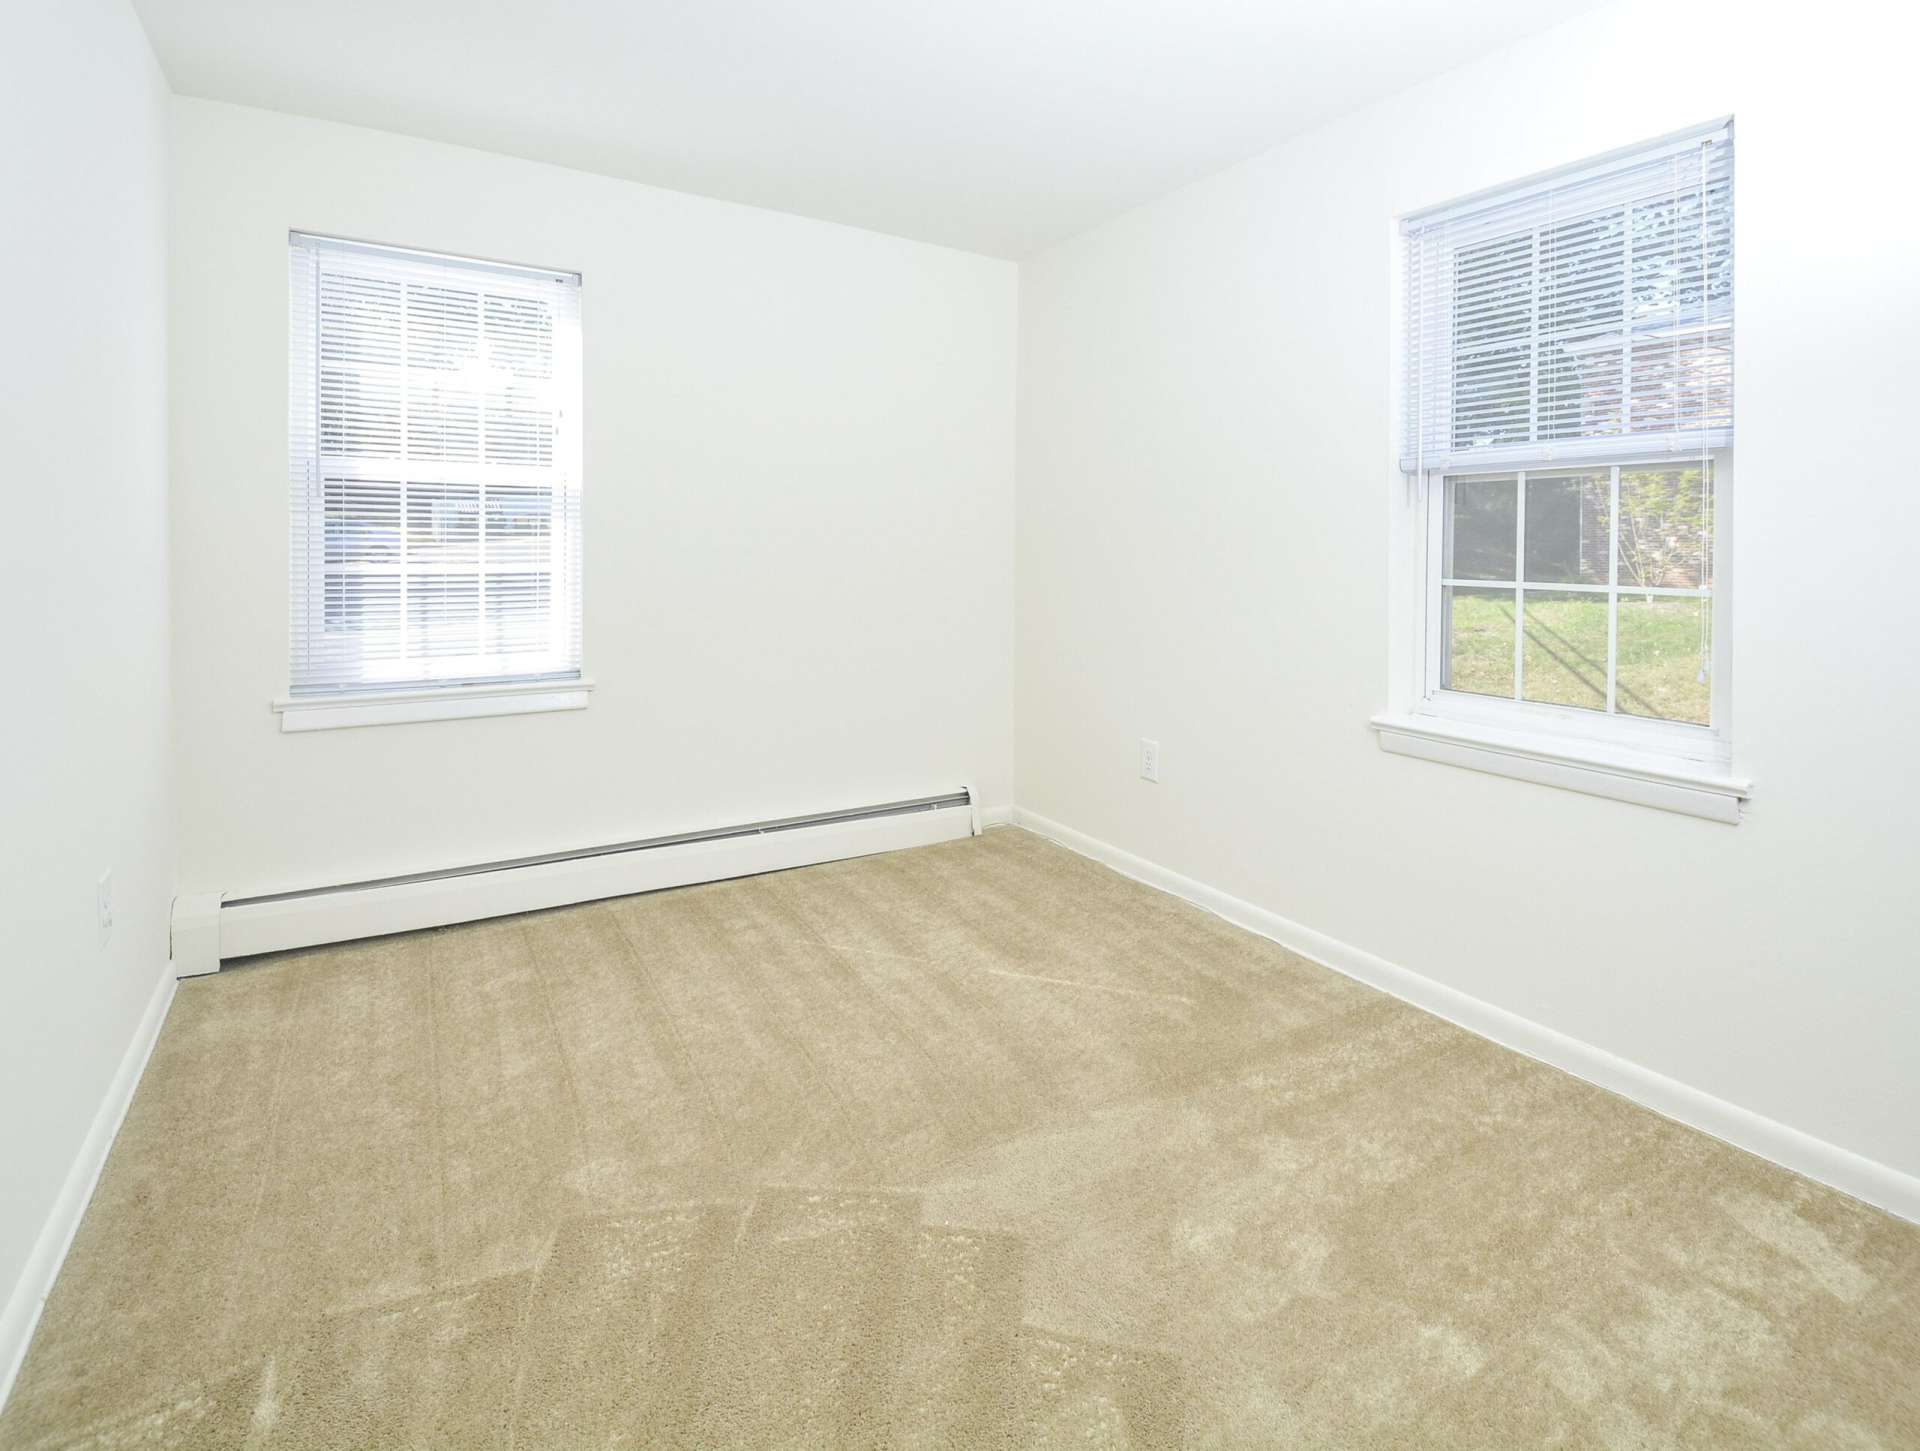 Bedroom with beige carpets, white walls, and 2 windows.